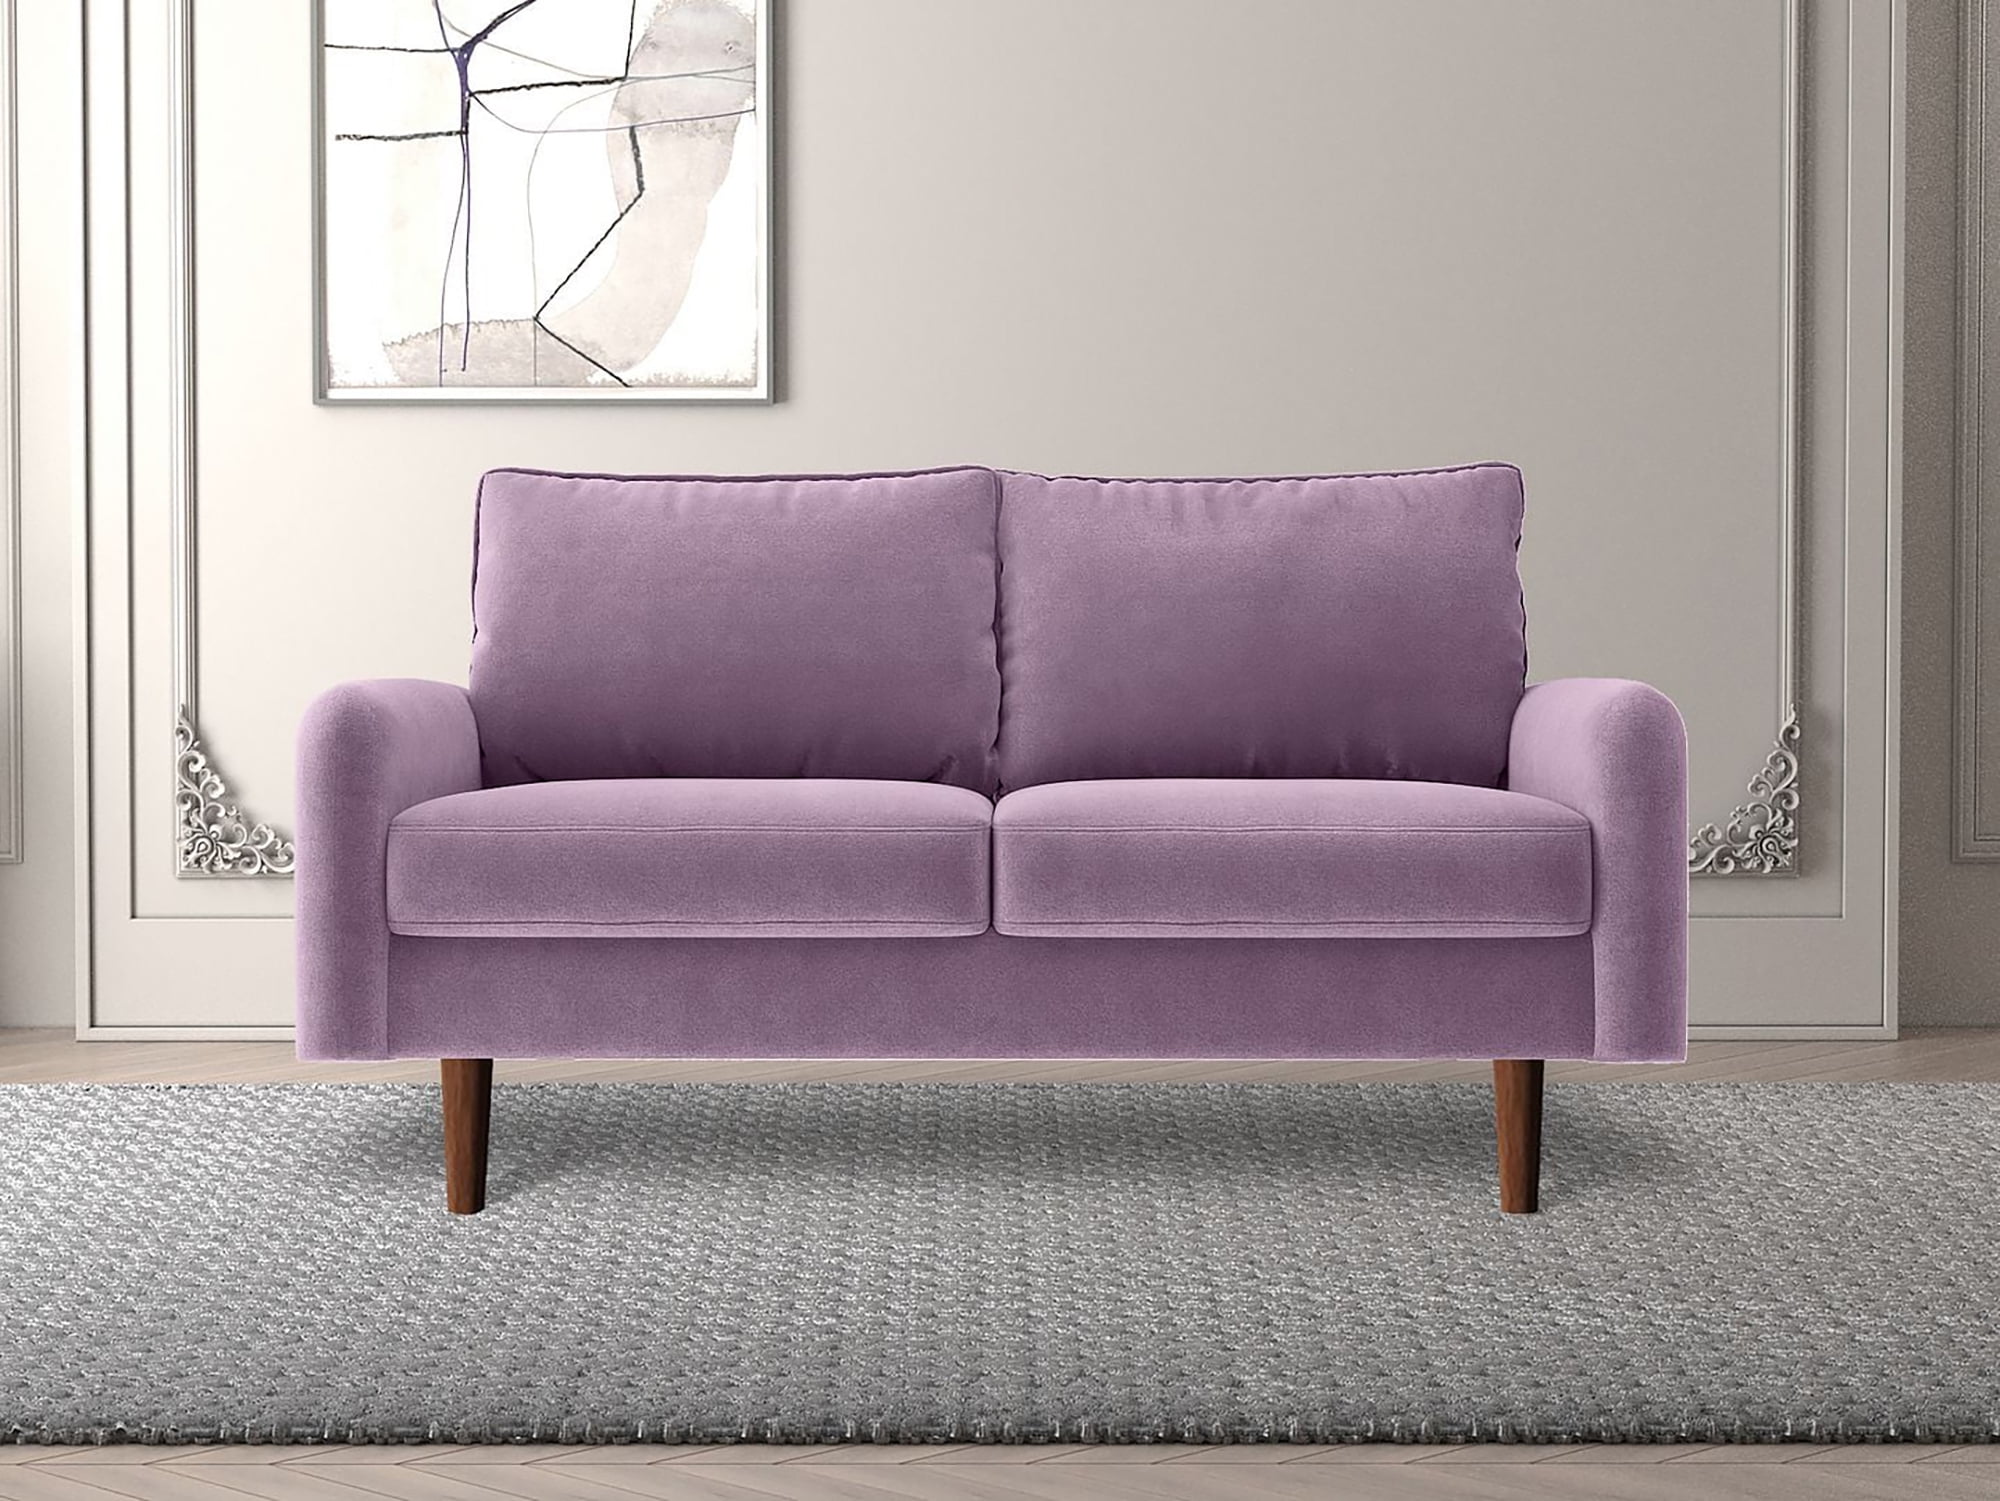 Koby Home Sectional Sofa 58 Loveseat